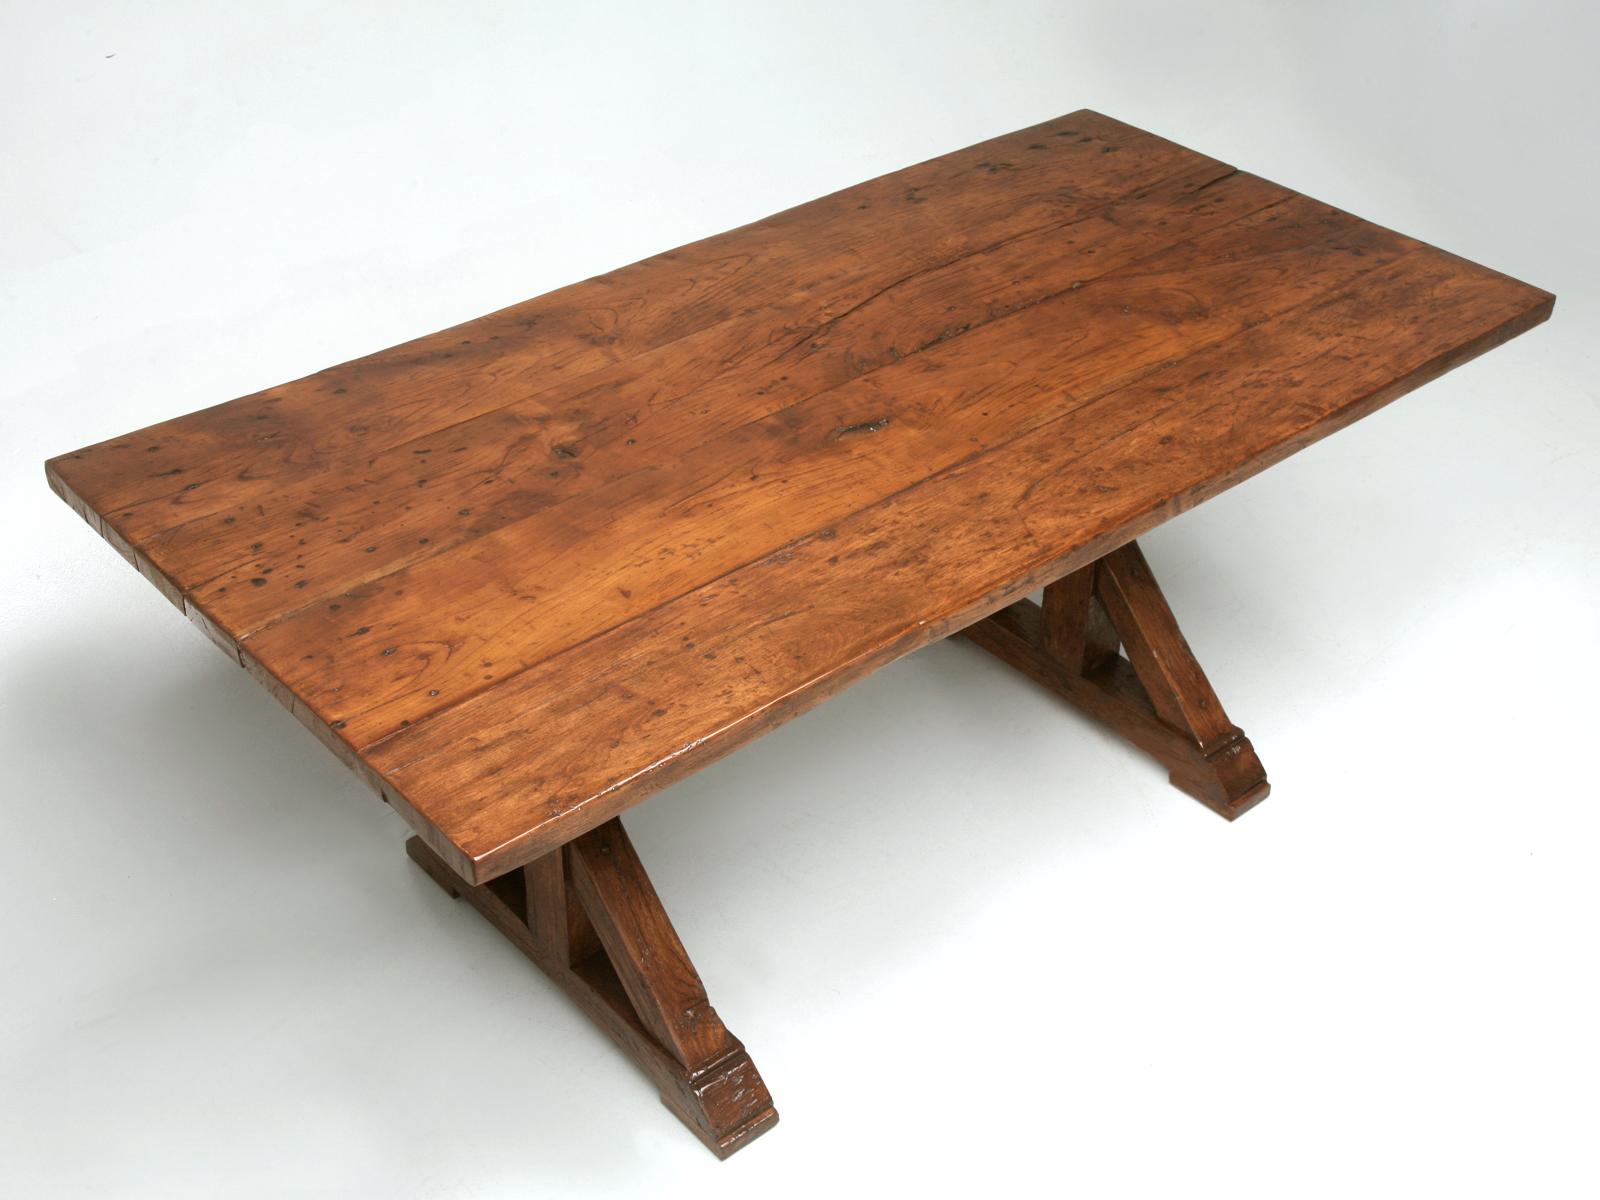 This exceptional French style farm, kitchen or dining room table was precisely copied from an authentic French farm table that dated from the late 1600's or early 1700s. Our Old Plank workshop used only reclaimed lumber, some of which was sourced in